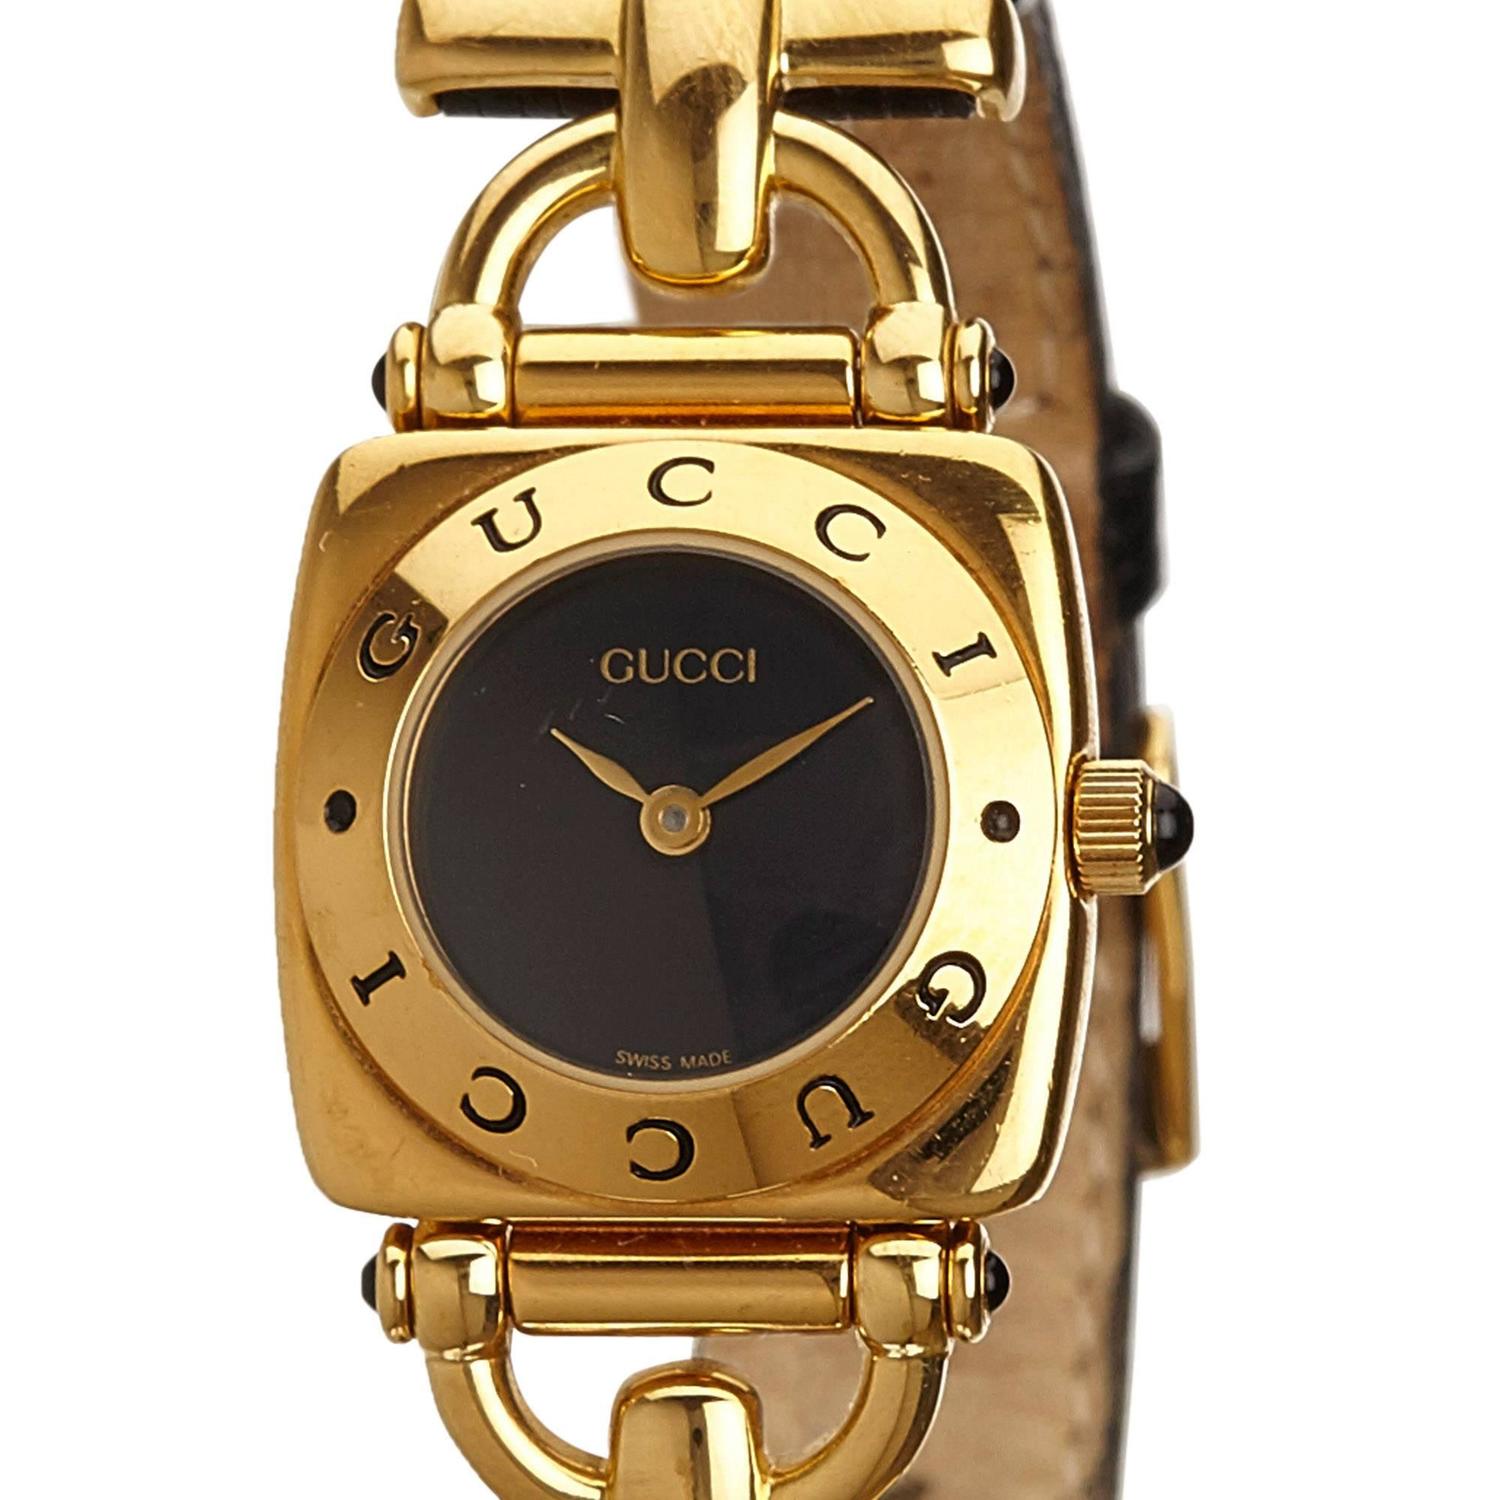 Gucci Black 6300L Series Watch For Sale at 1stdibs